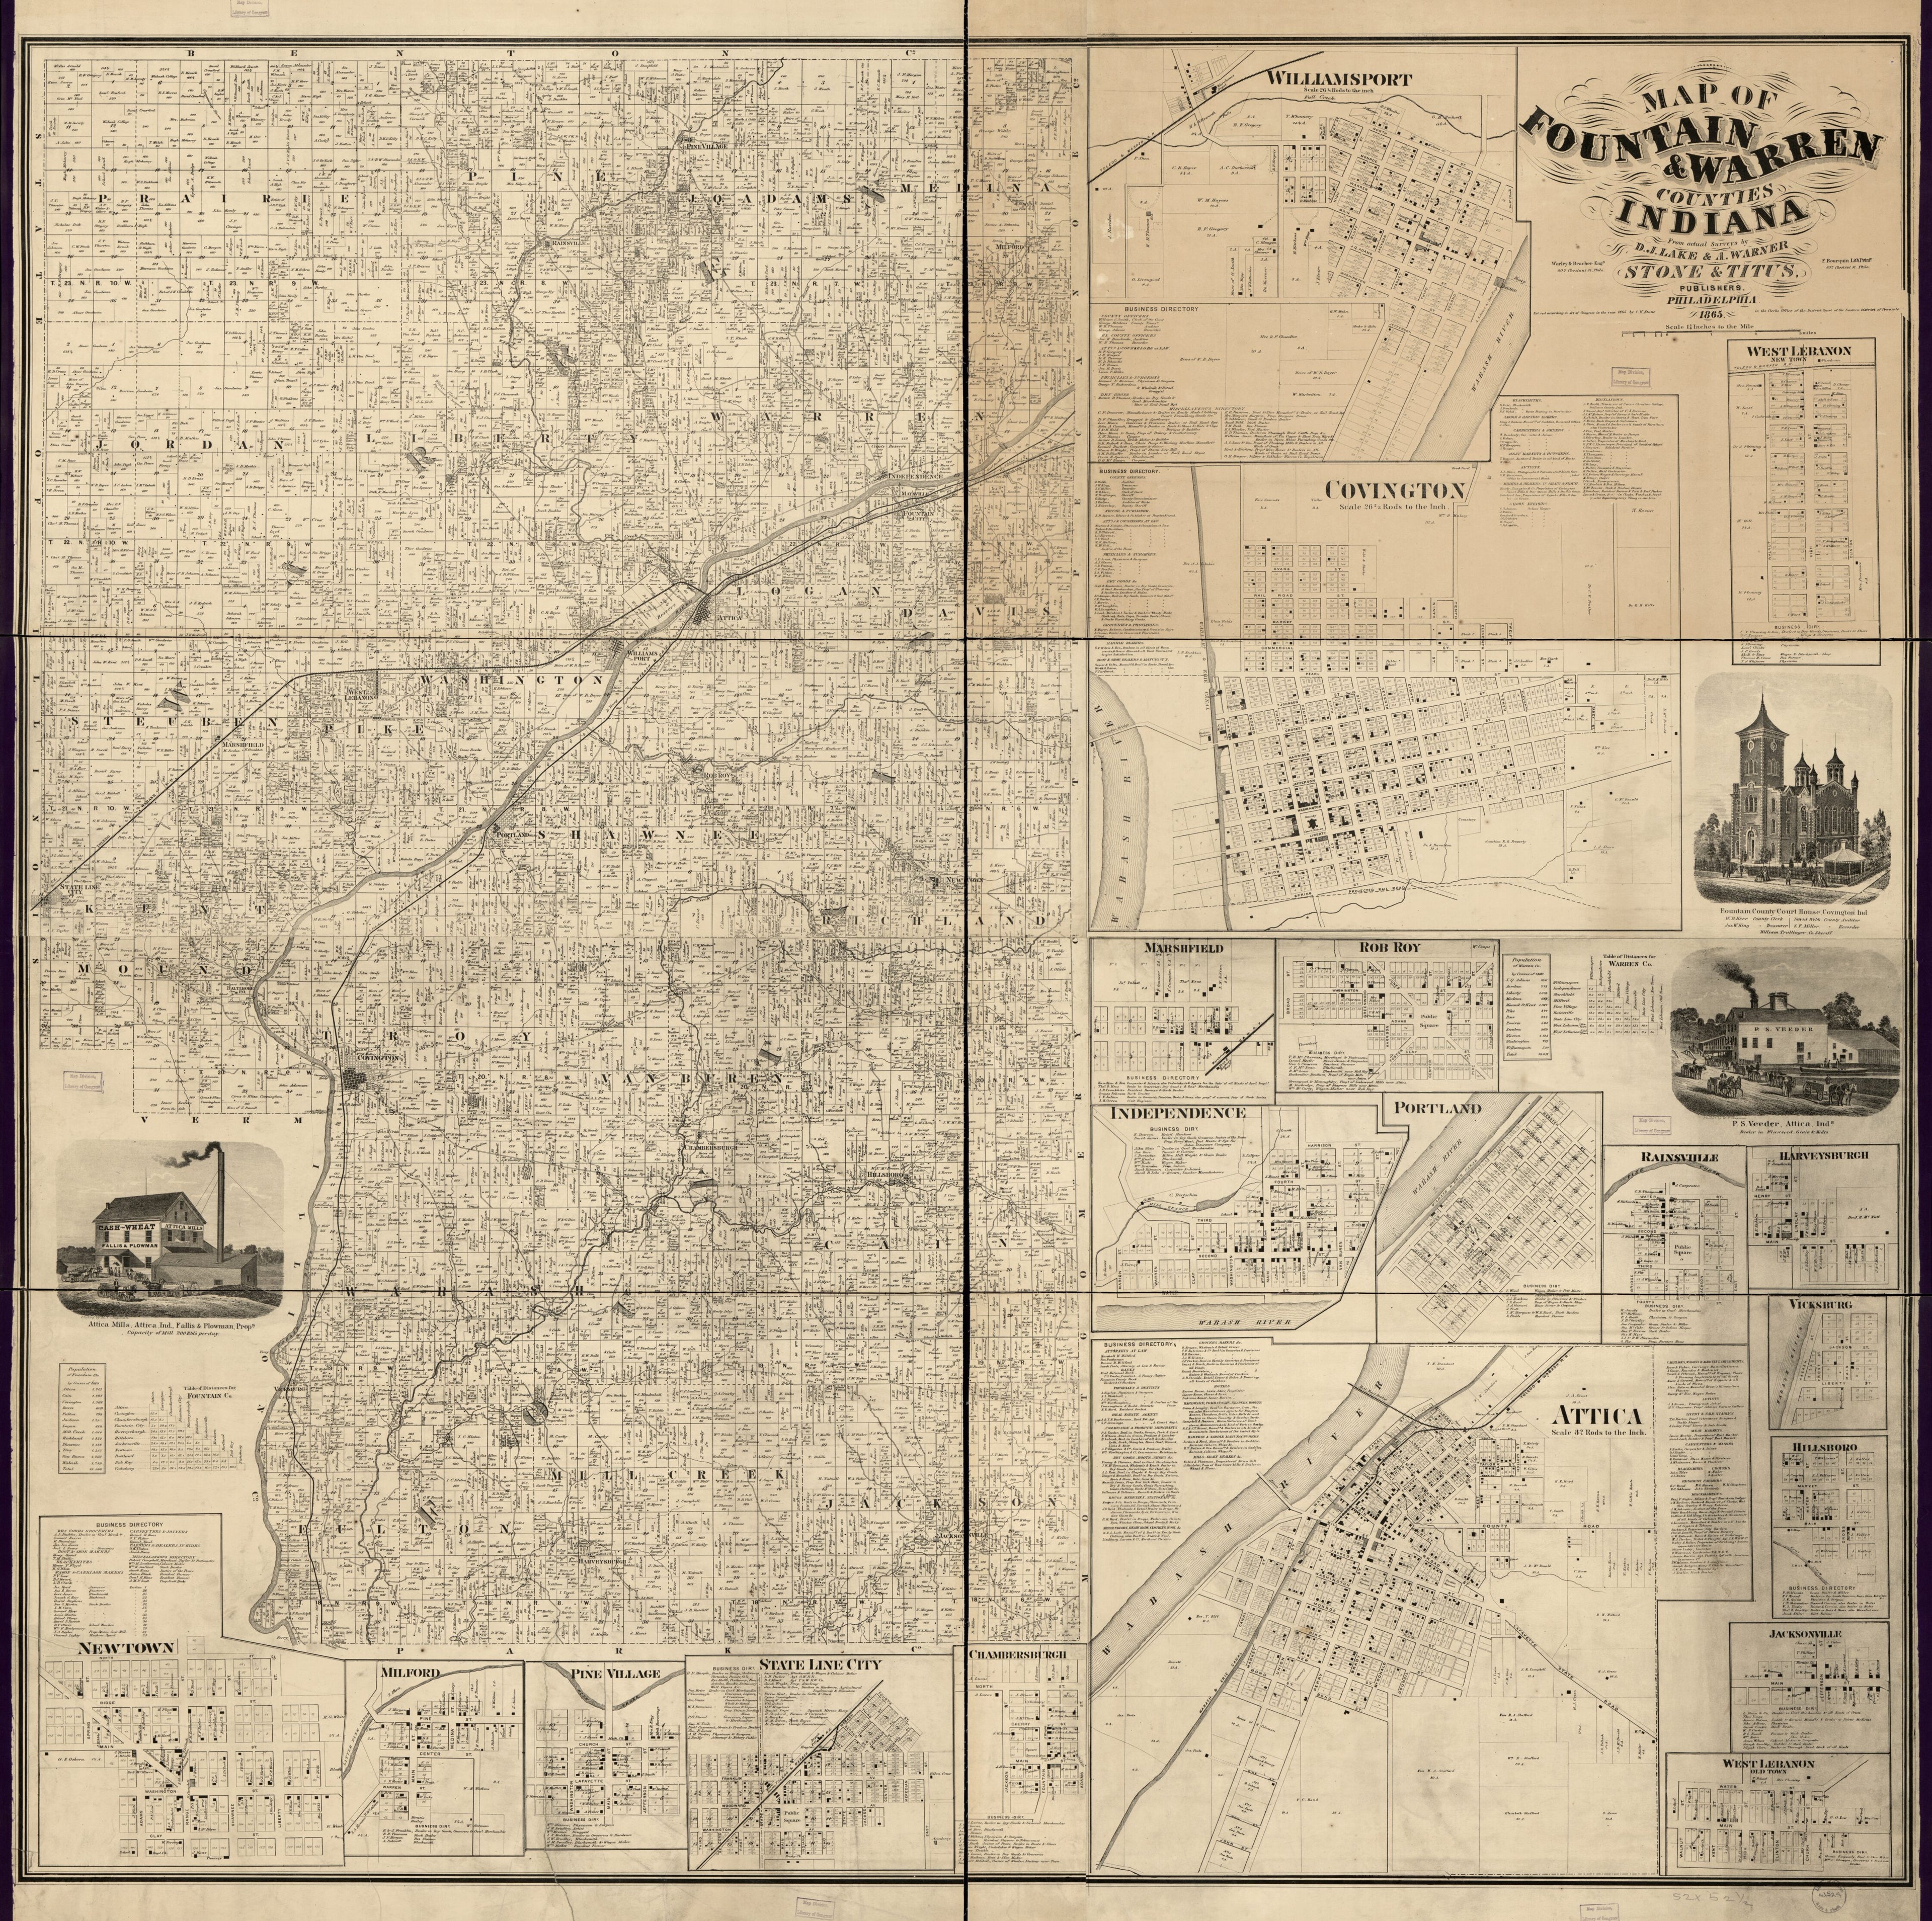 This old map of Map of Fountain &amp; Warren Counties, Indiana (Map of Fountain and Warren Counties, Indiana) from 1865 was created by D. J. Lake, A. Warner,  Worley &amp; Bracher in 1865